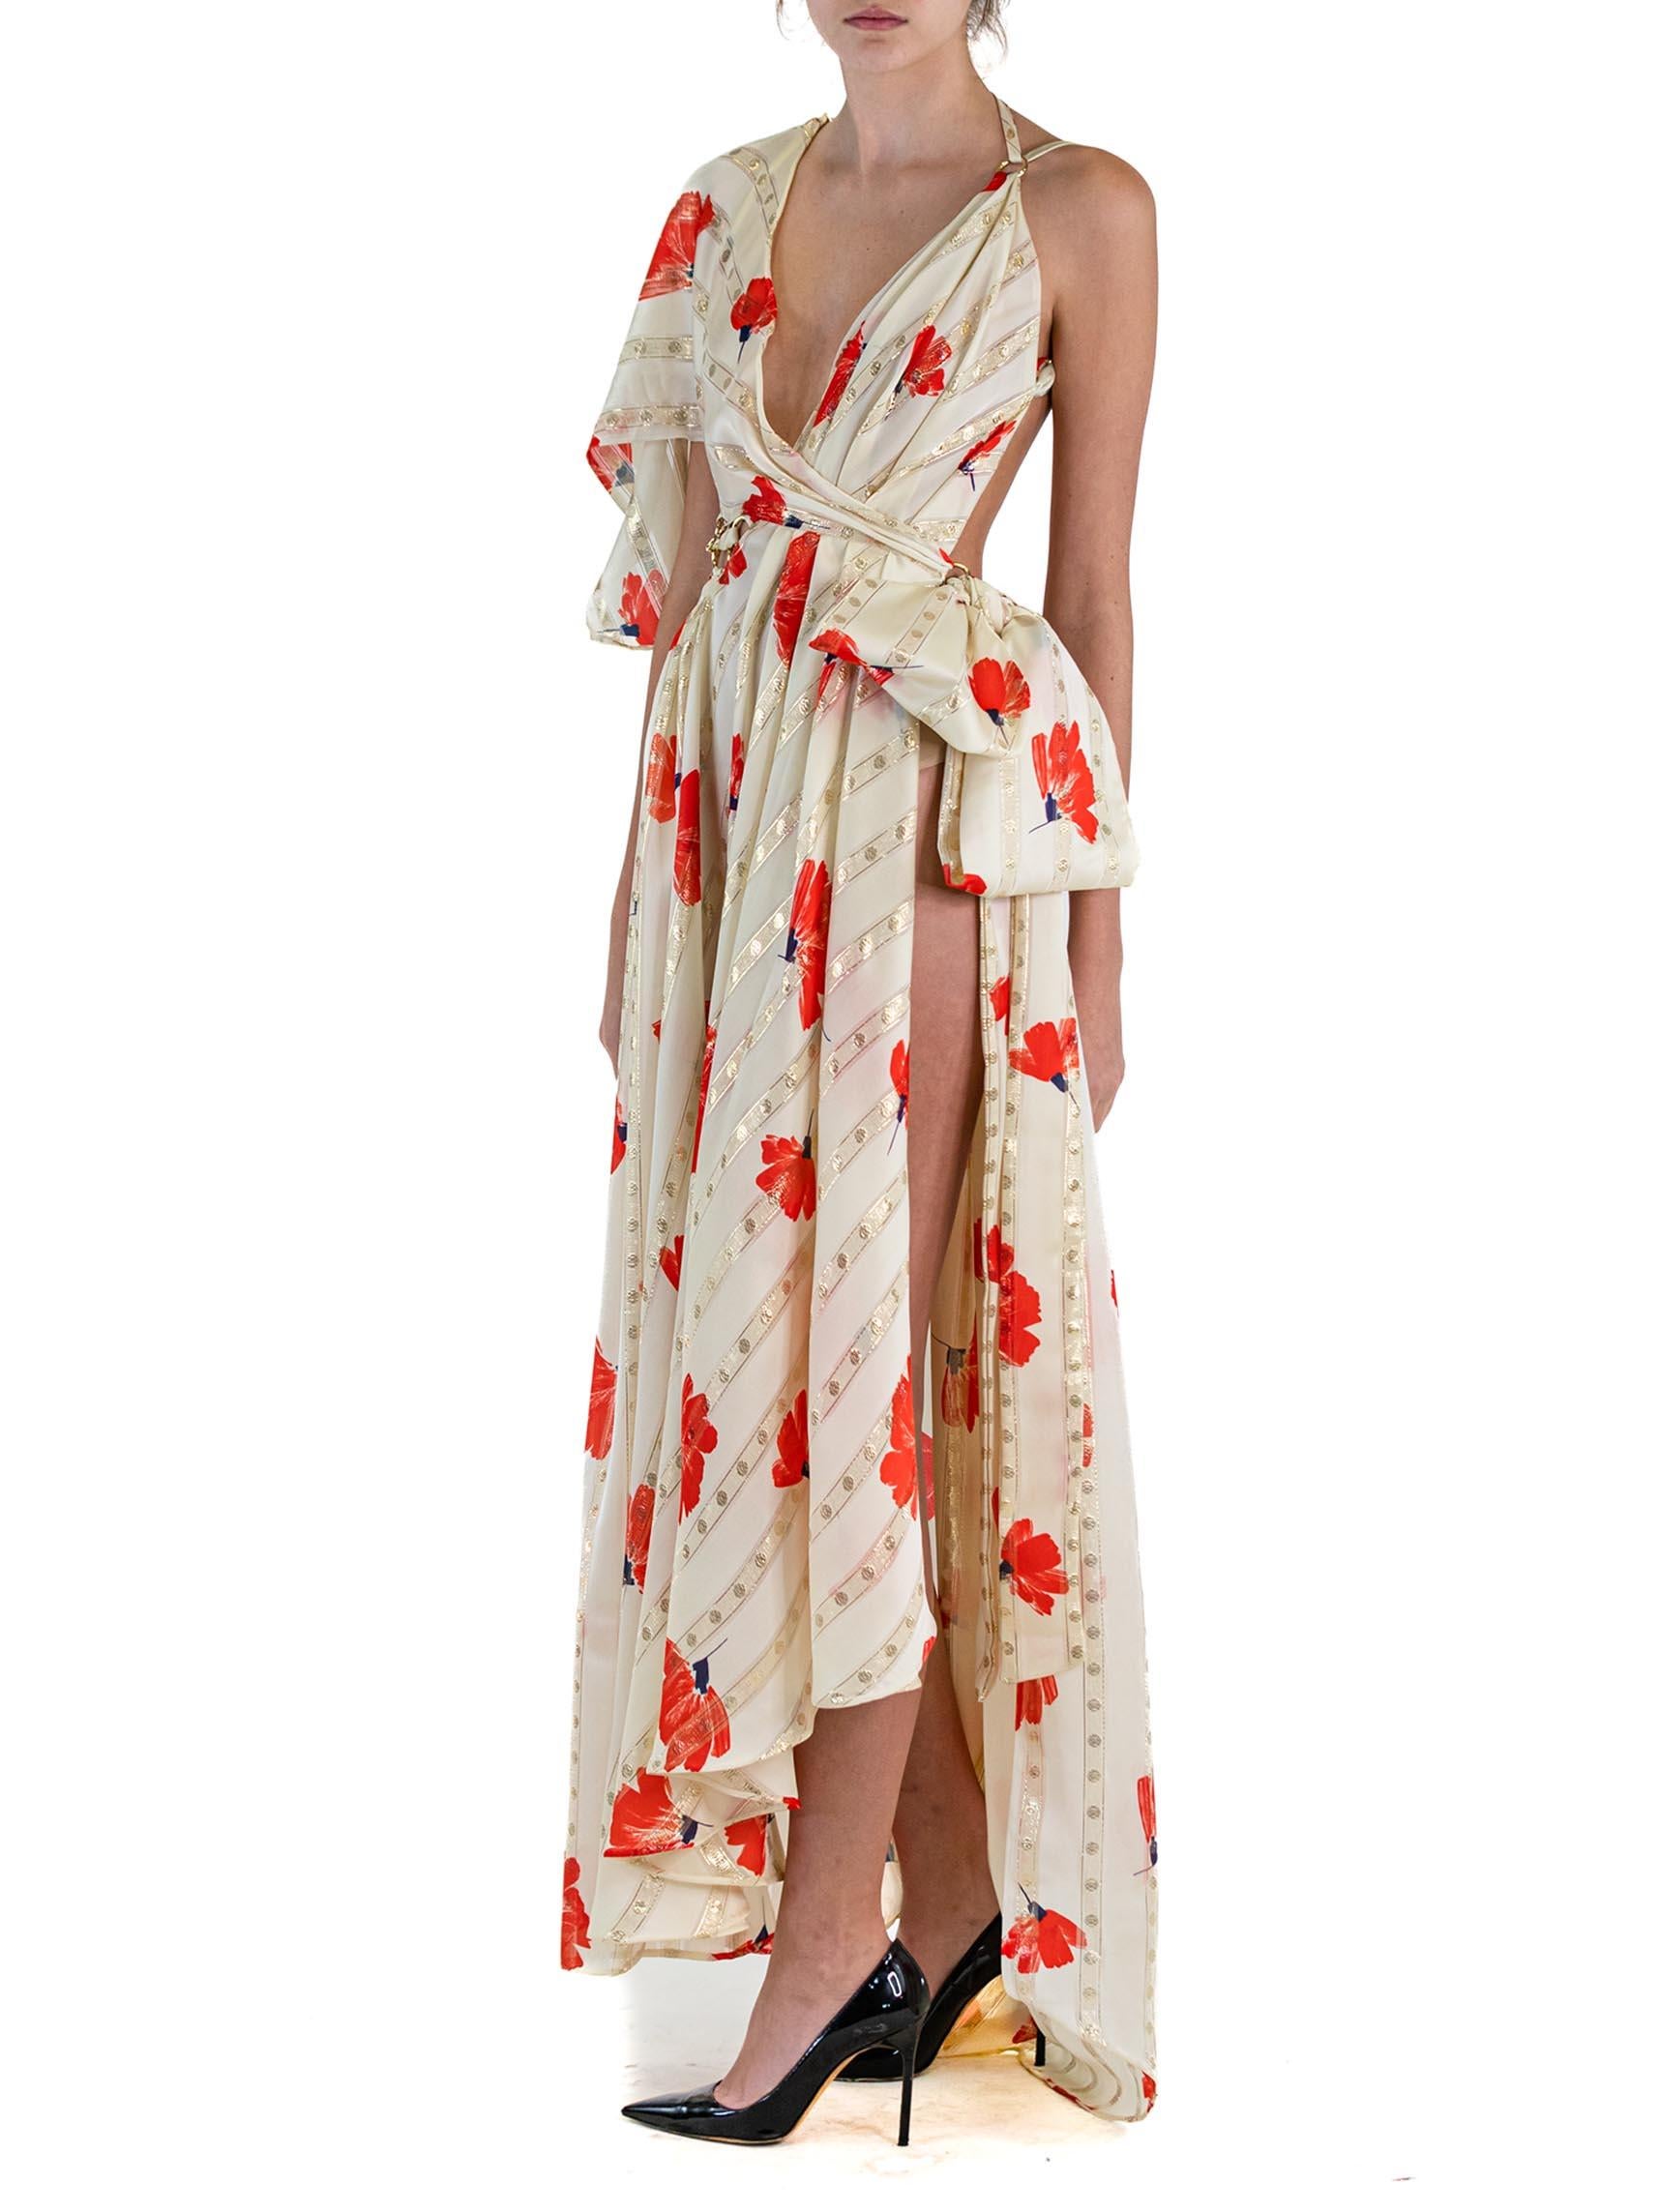 MORPHEW ATELIER Cream & Red Poly/Lurex Lamé Cut-Out Gown With High Slit Bow For Sale 2